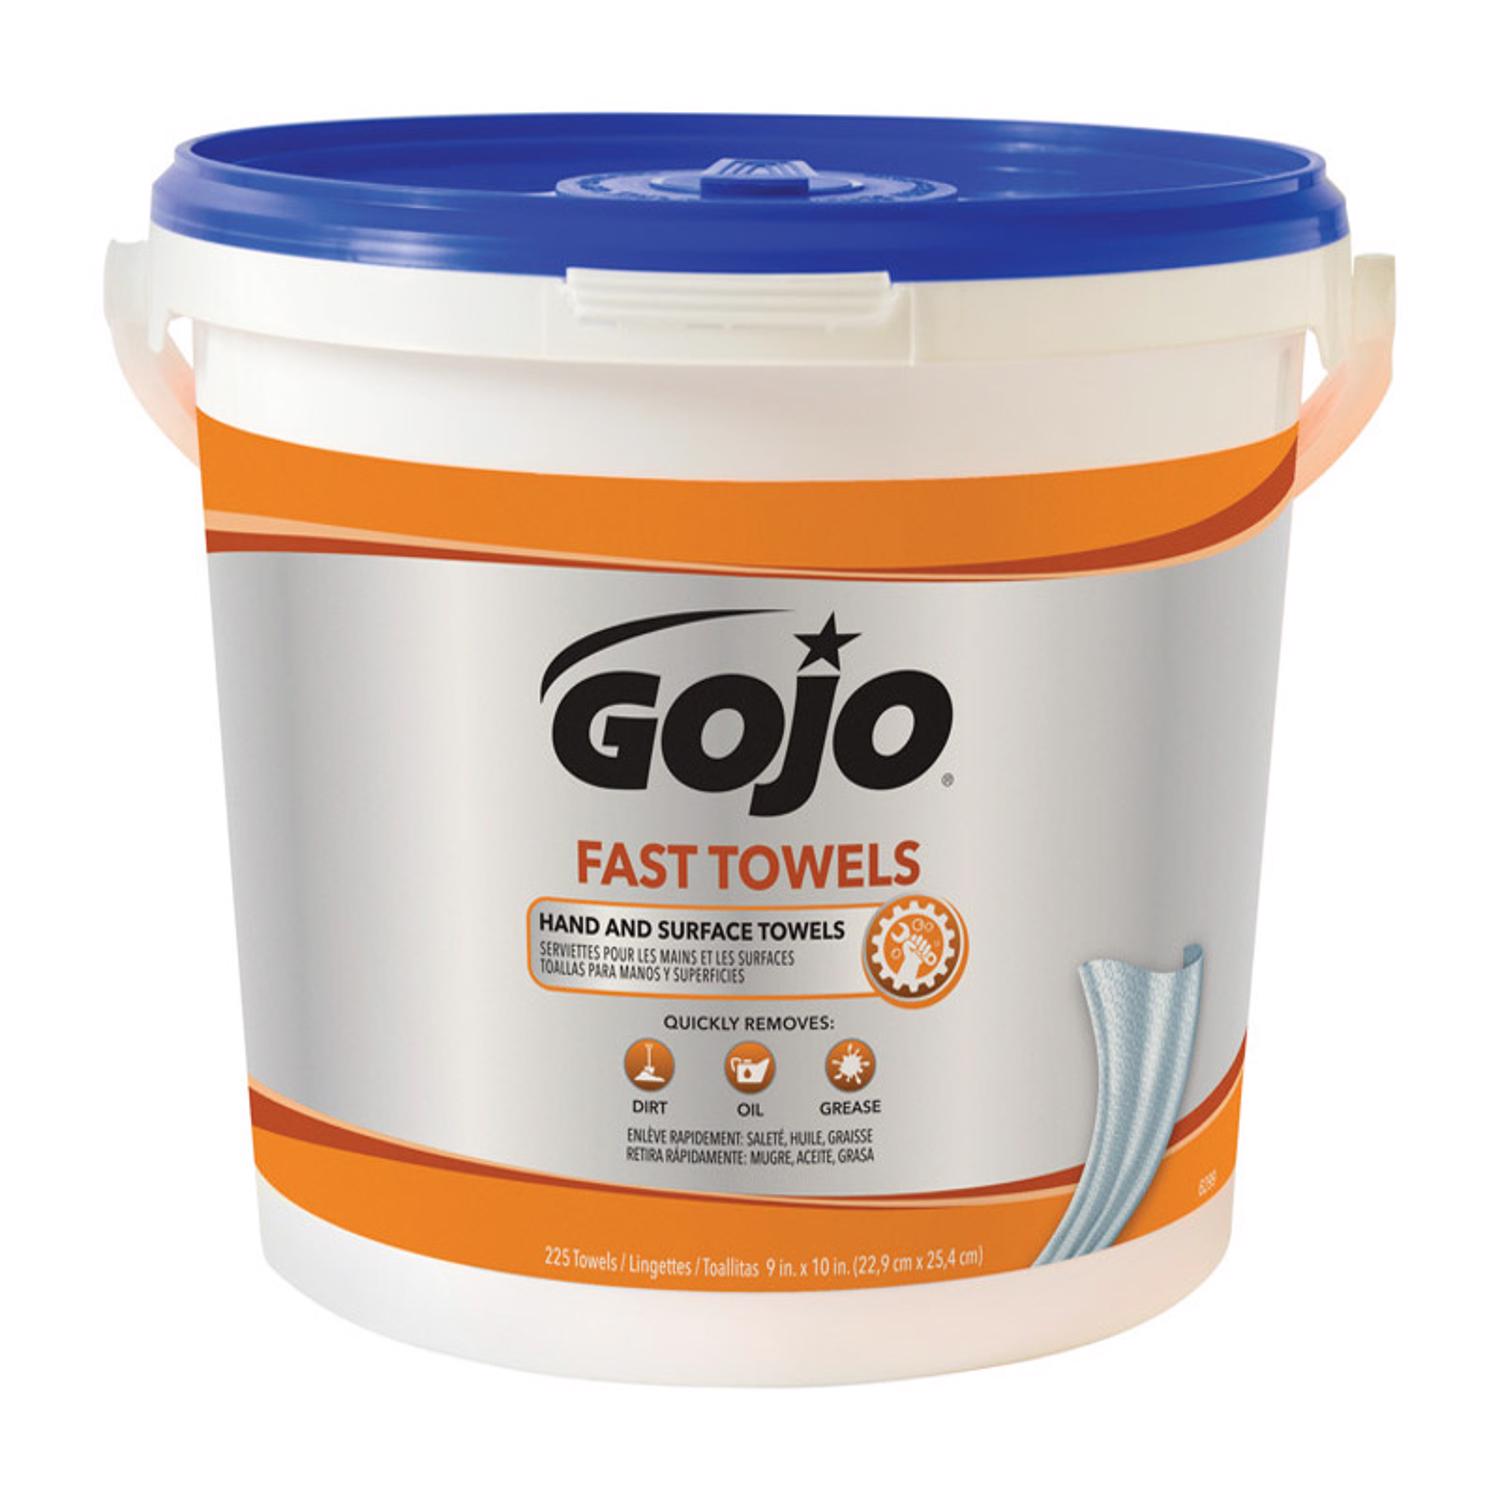 Photos - Other Cosmetics Gojo Fast Towels Citrus Scent Hand Wipes 6299-02 